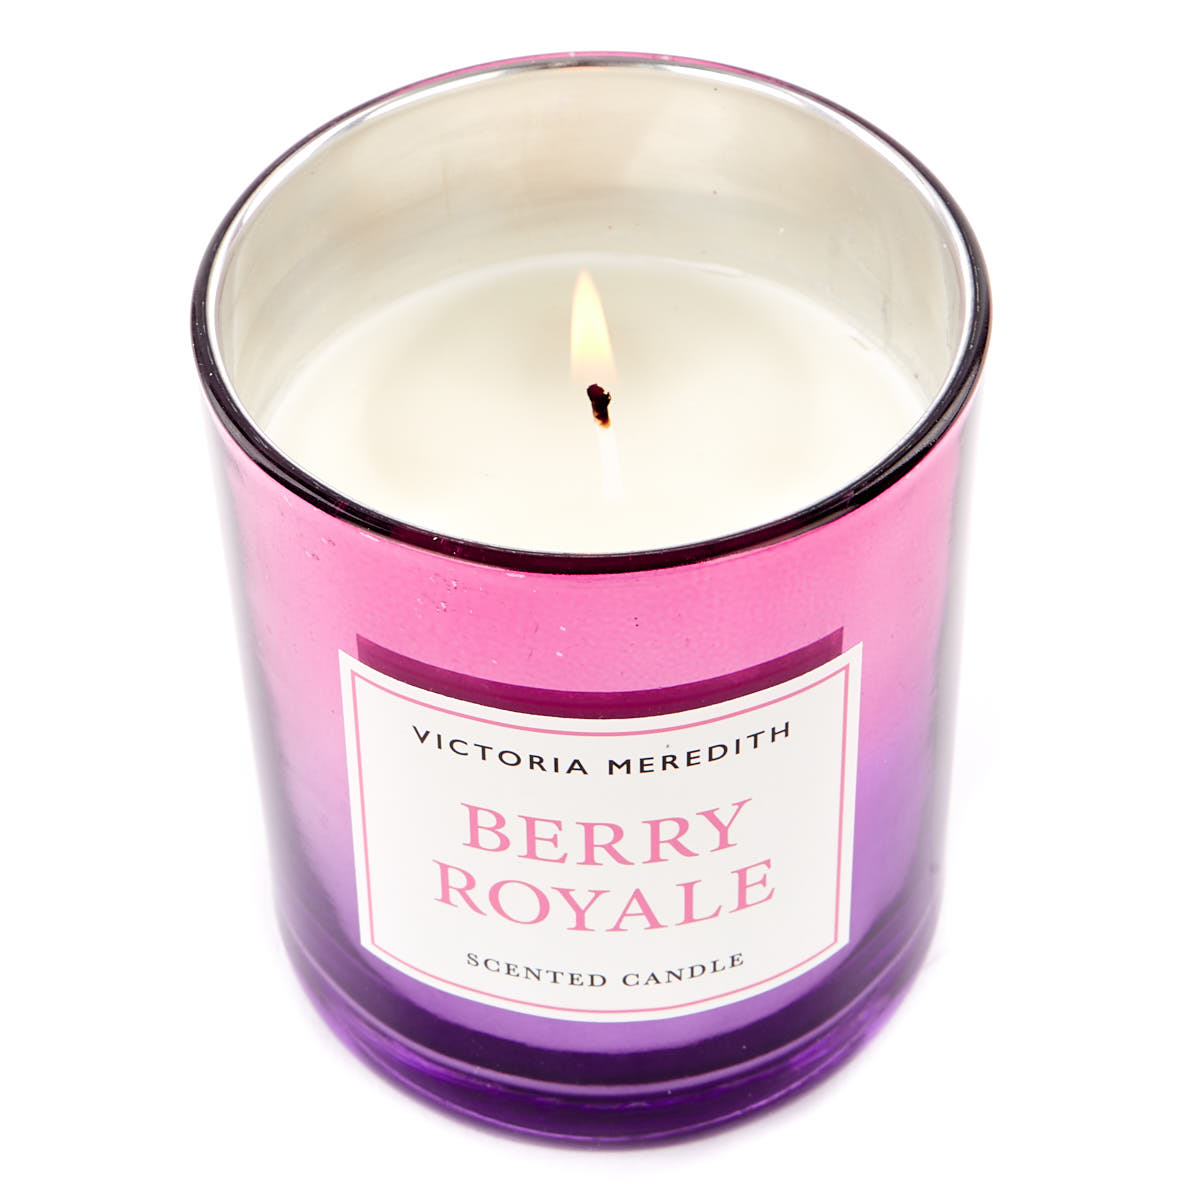 Victoria Meredith Berry Royale Scented Candle